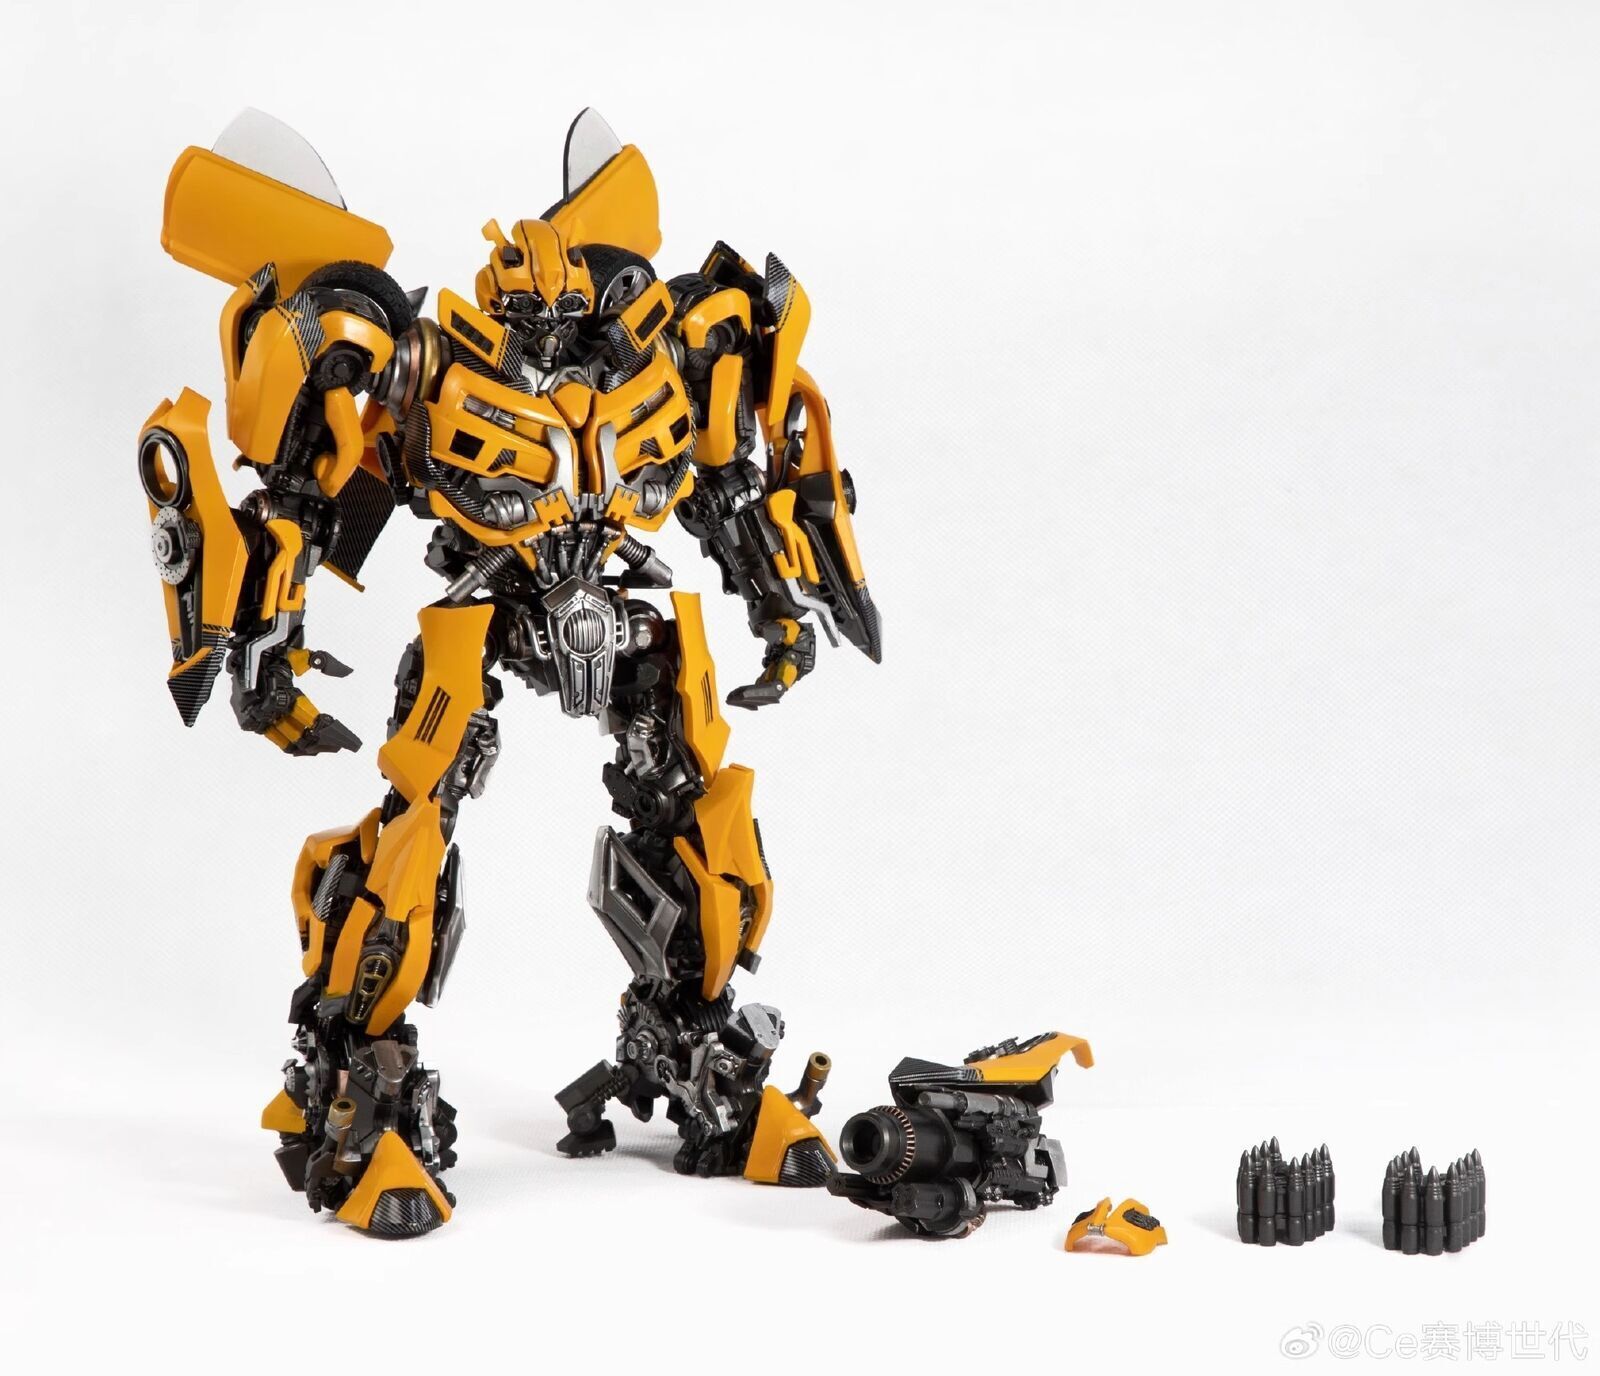 New In Stock Cyber Era CE-04 Bumble Bee Oversized Version Action Figure